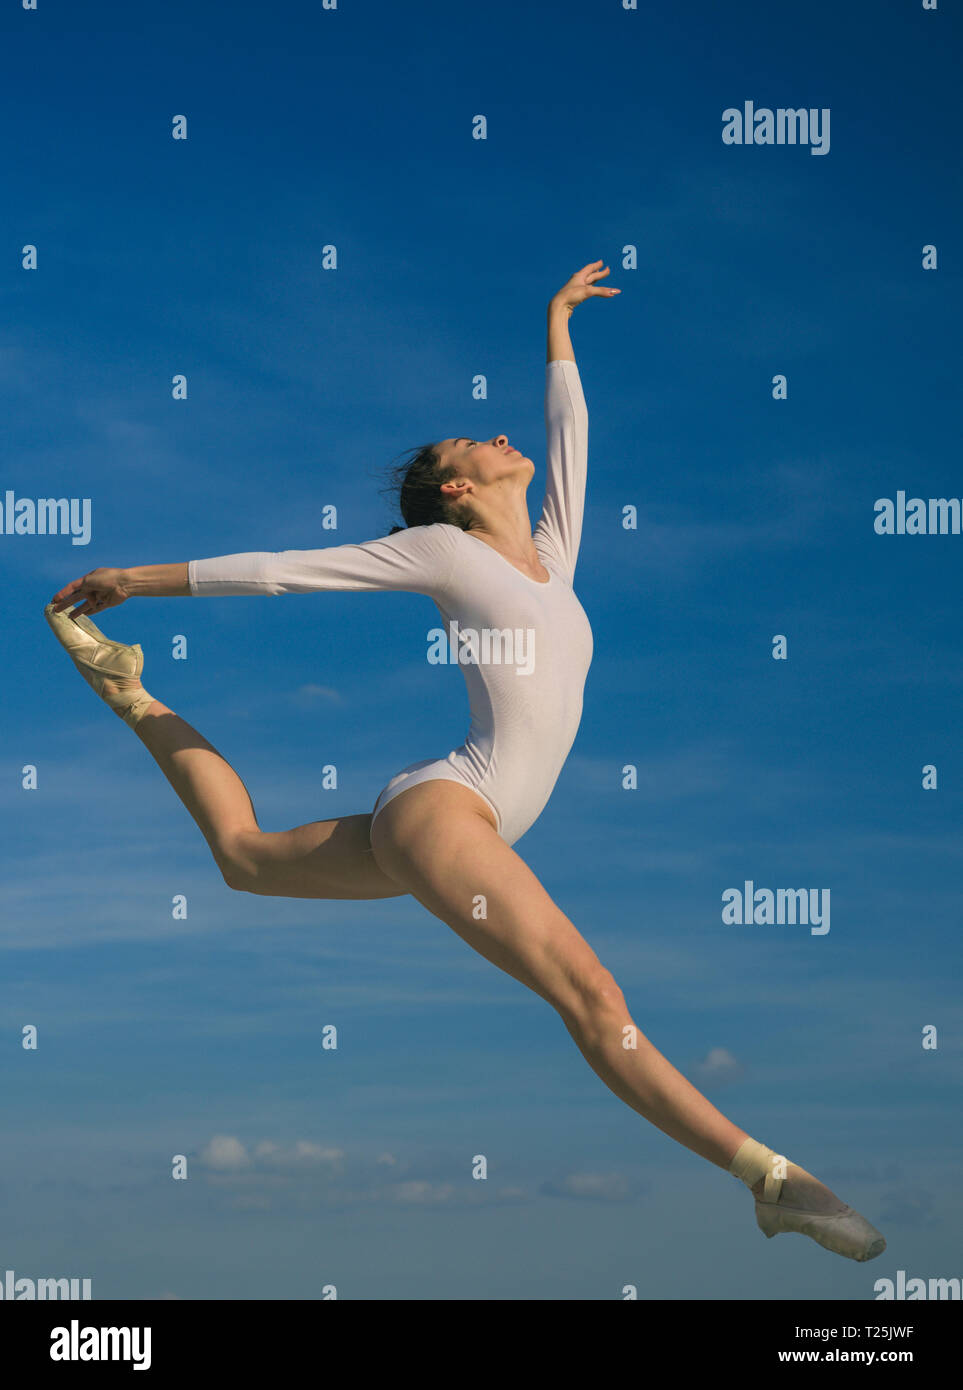 Graceful beauty. Concert performance dance. Young ballerina jumping on blue sky. Classic dance style. Cute ballet dancer. Pretty woman in dance wear Stock Photo